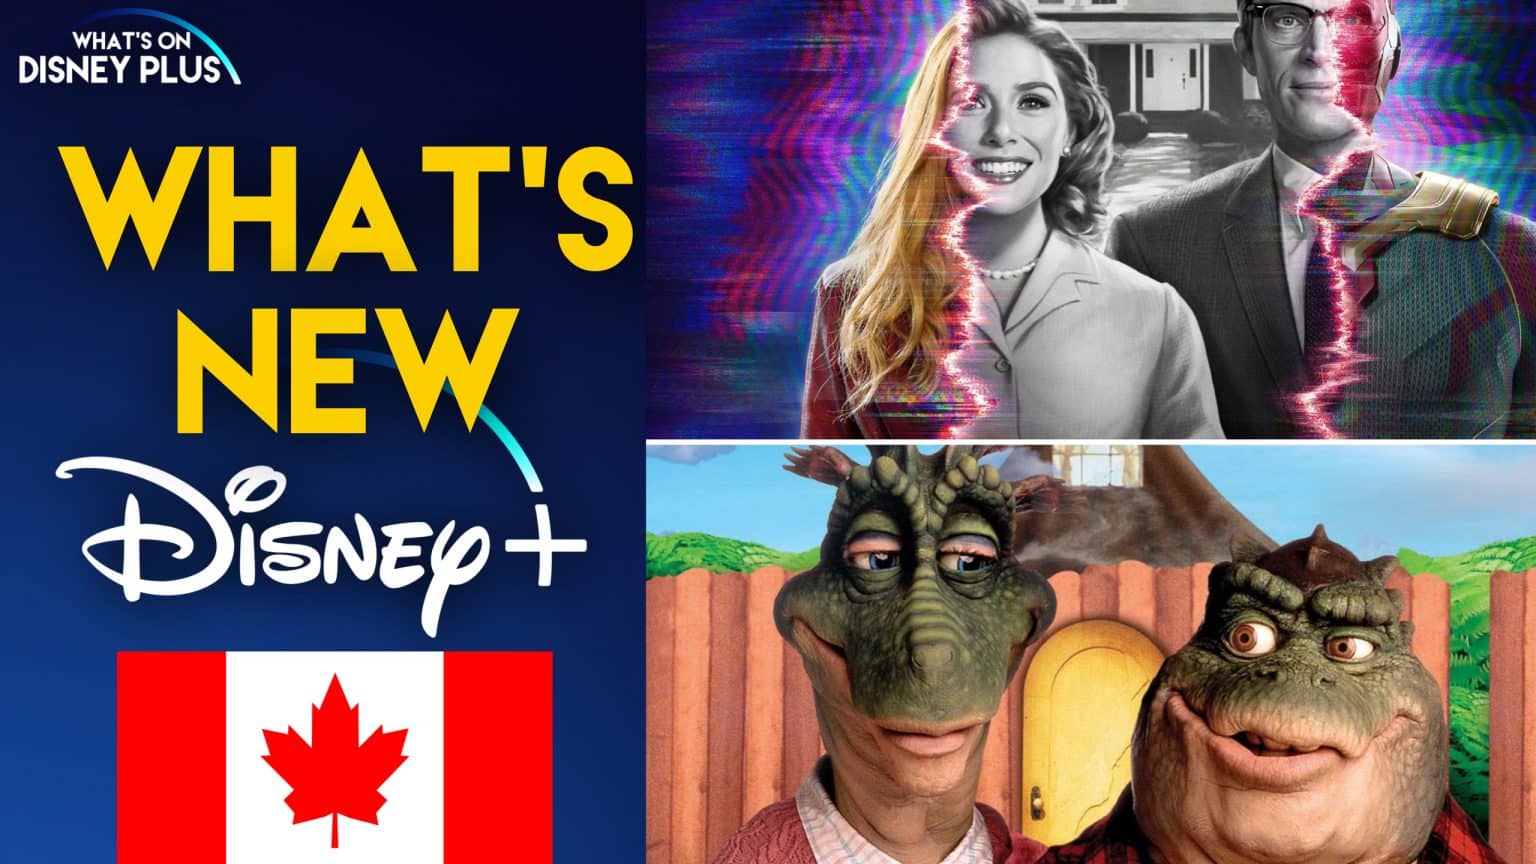 What’s New On Disney+ (UK/Ireland) Clouds, Meet The